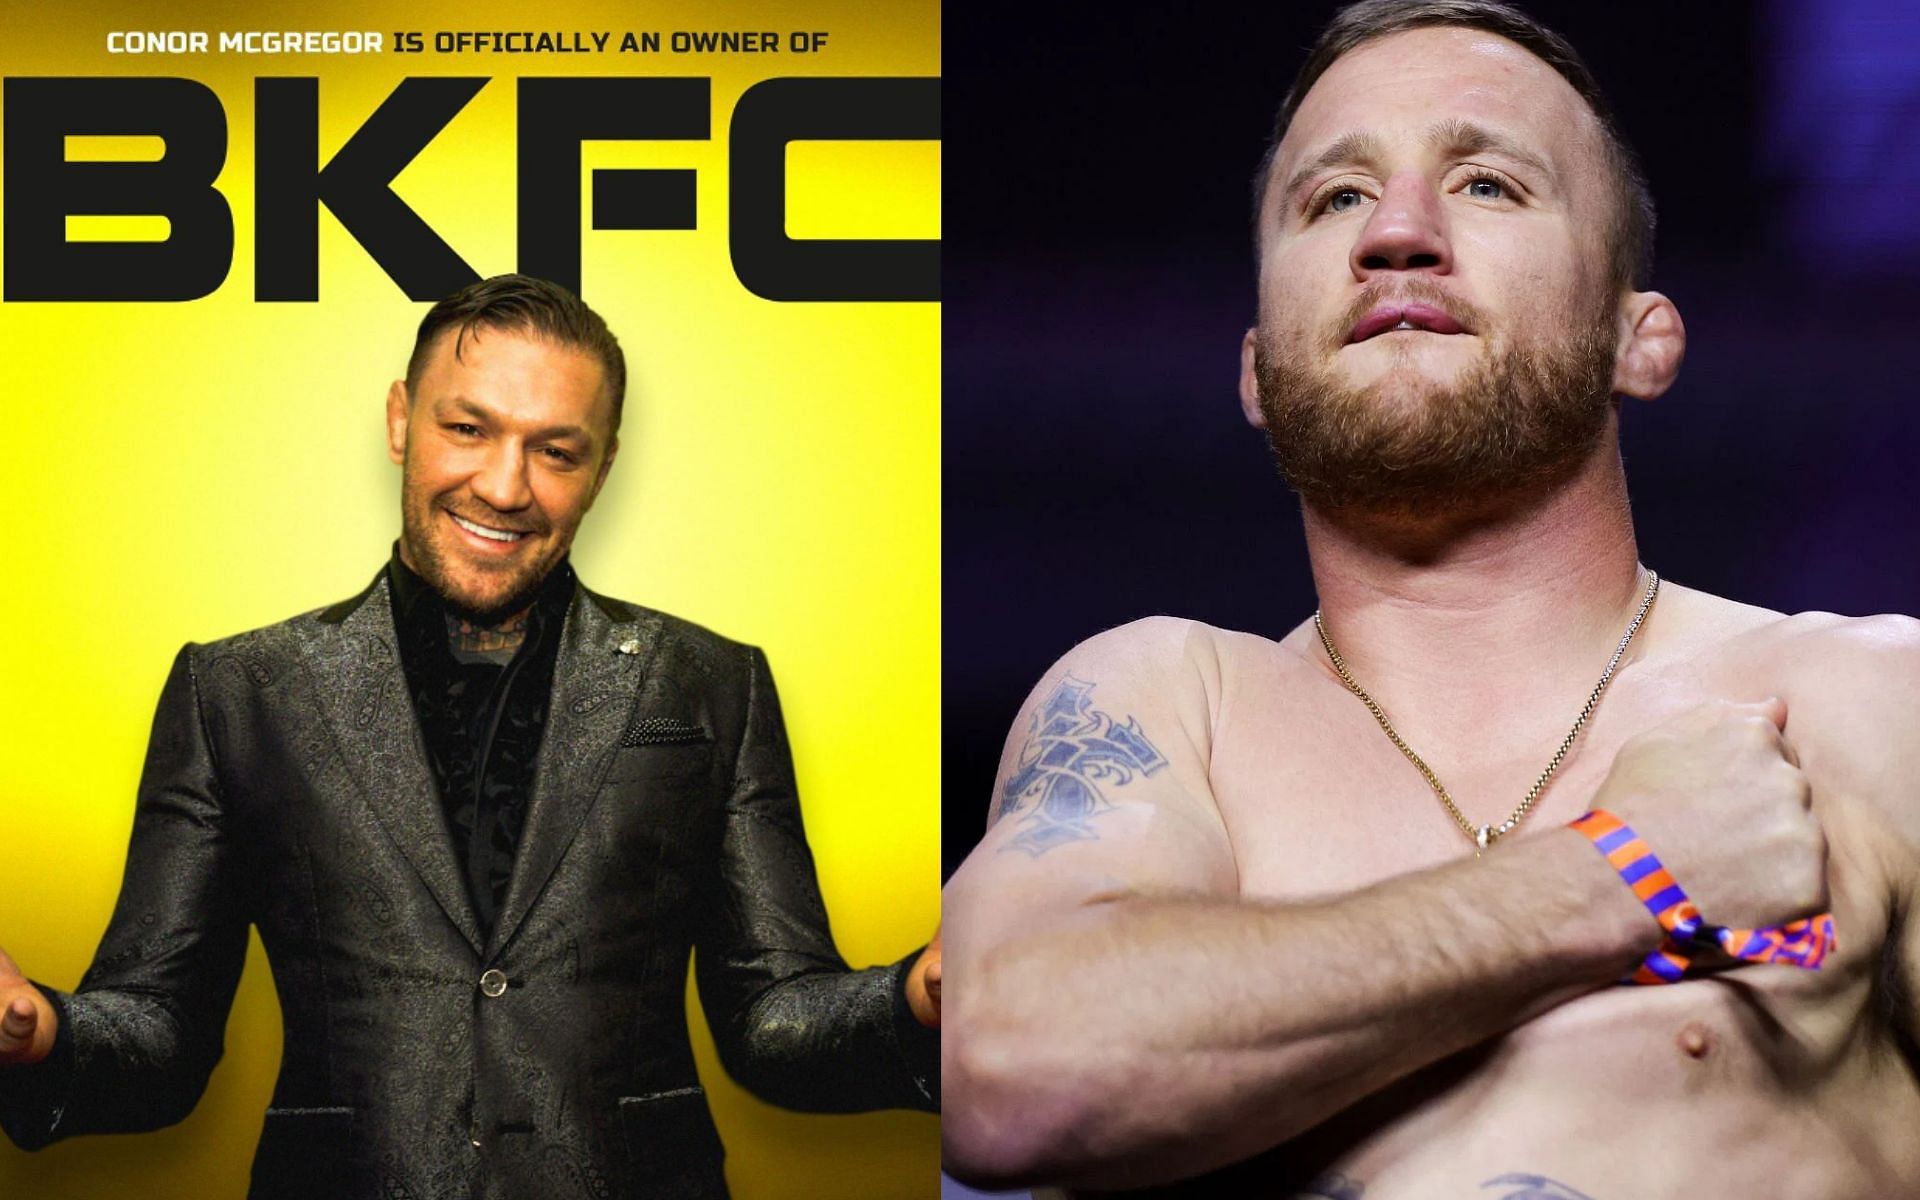 Conor McGregor (left) uses Justin Gaethje (right) to illustrate with BKFC is better than any MMA promotions outside the UFC [Images Courtesy: @GettyImages, @thenotoriousmma on Instagram]